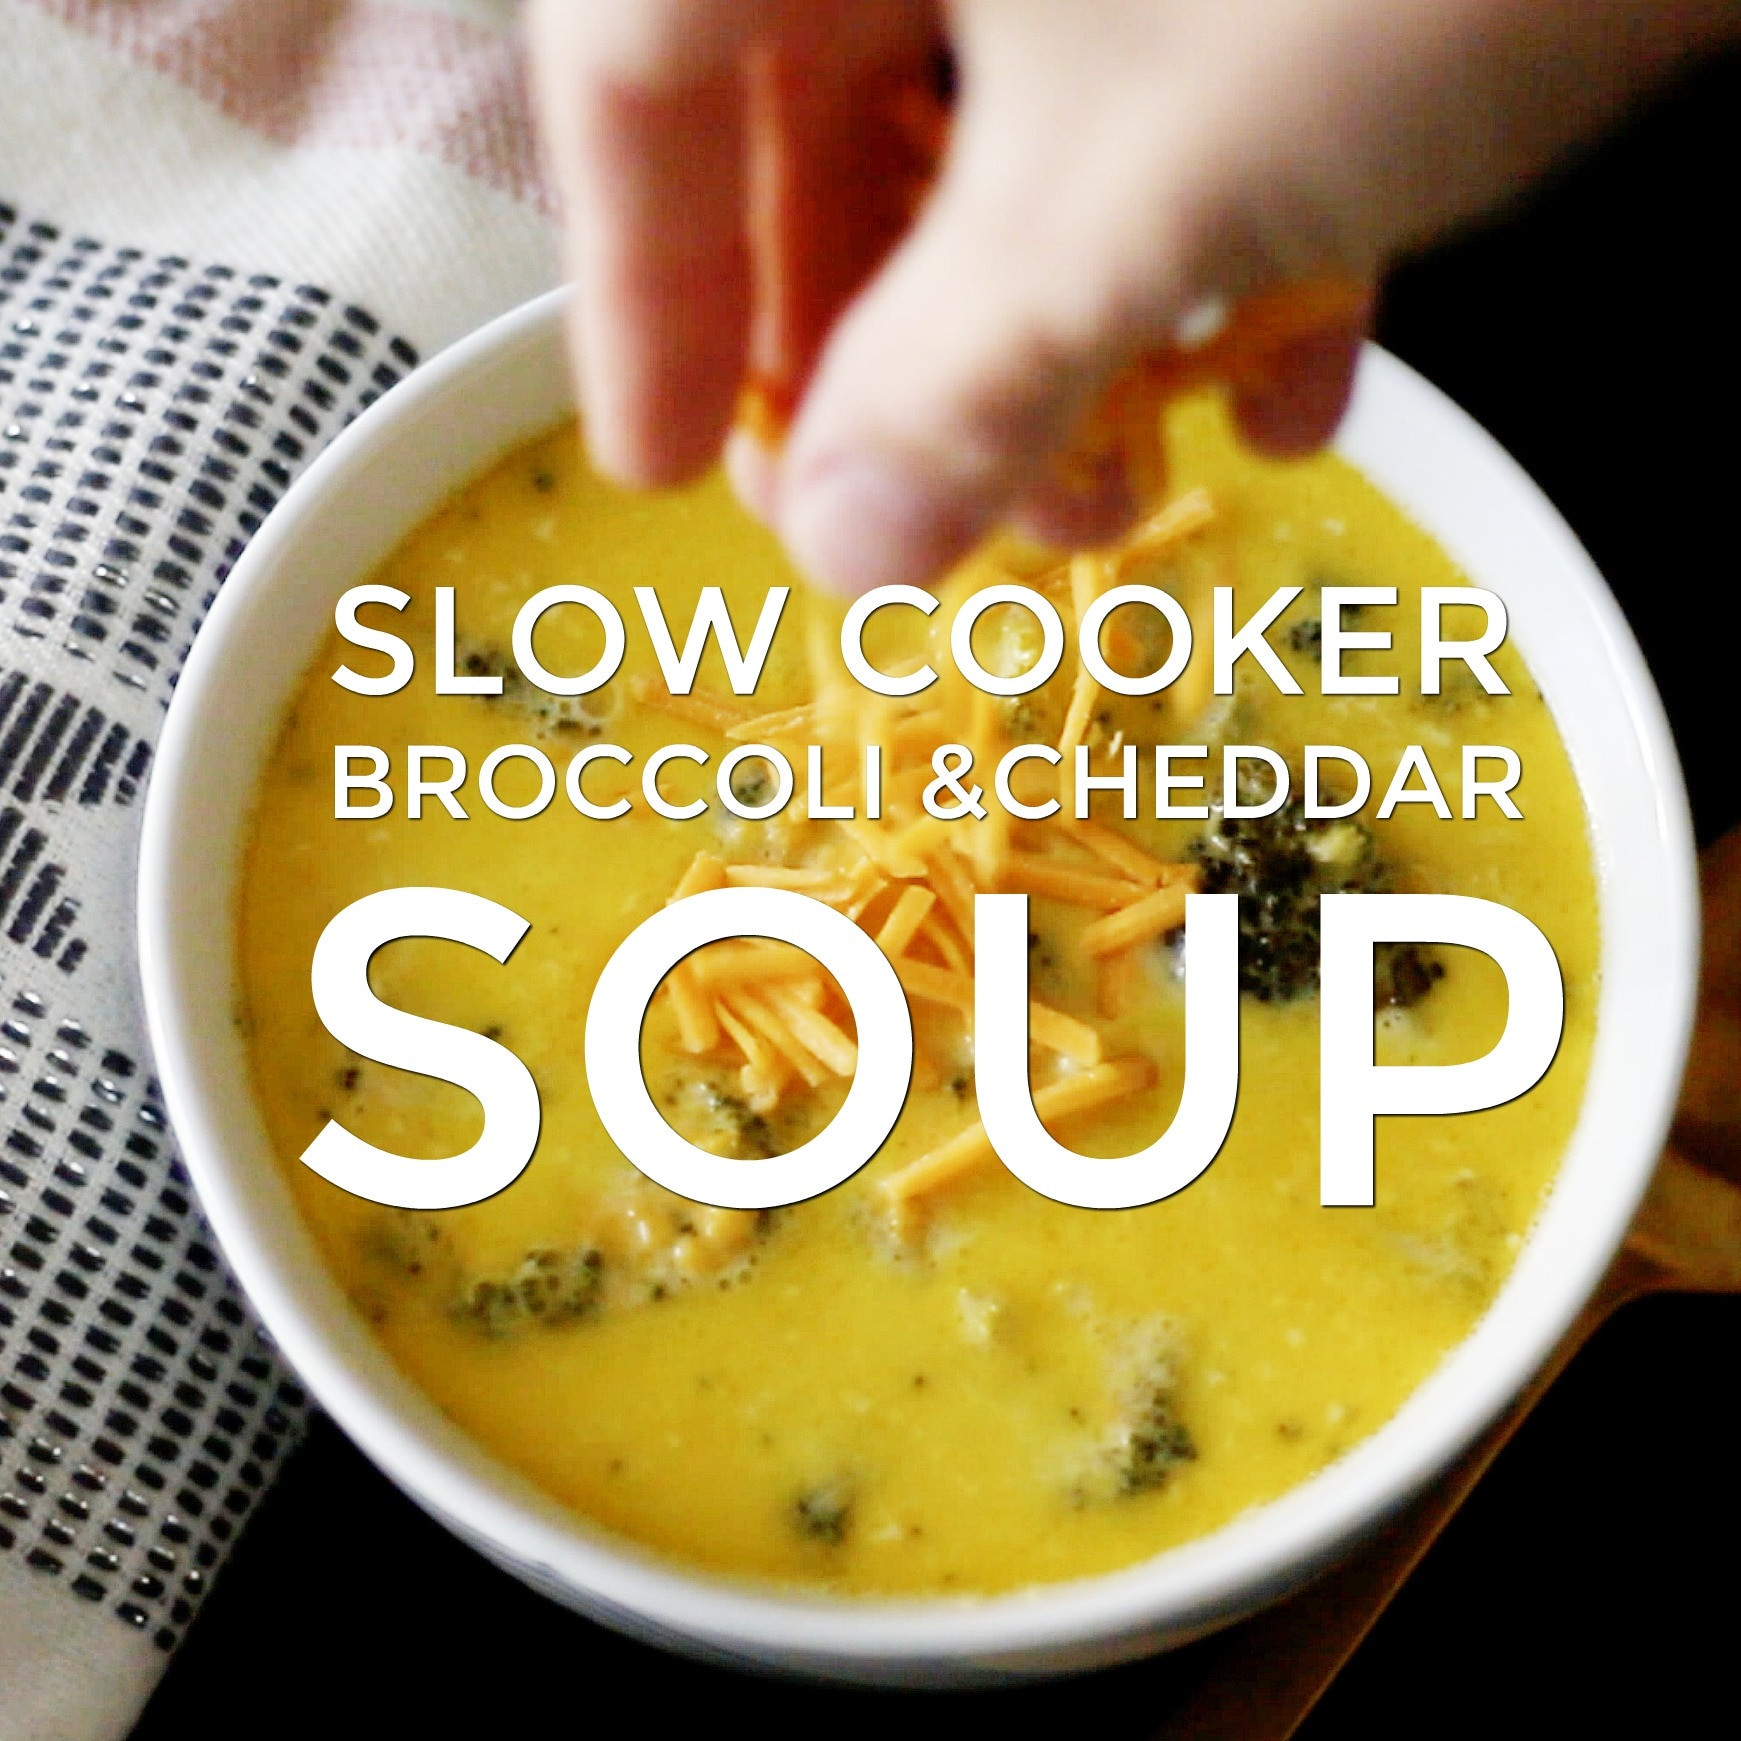 Slow Cooker Broccoli Cheddar Soup
 Warm Up with Slow Cooker Broccoli Cheddar Soup